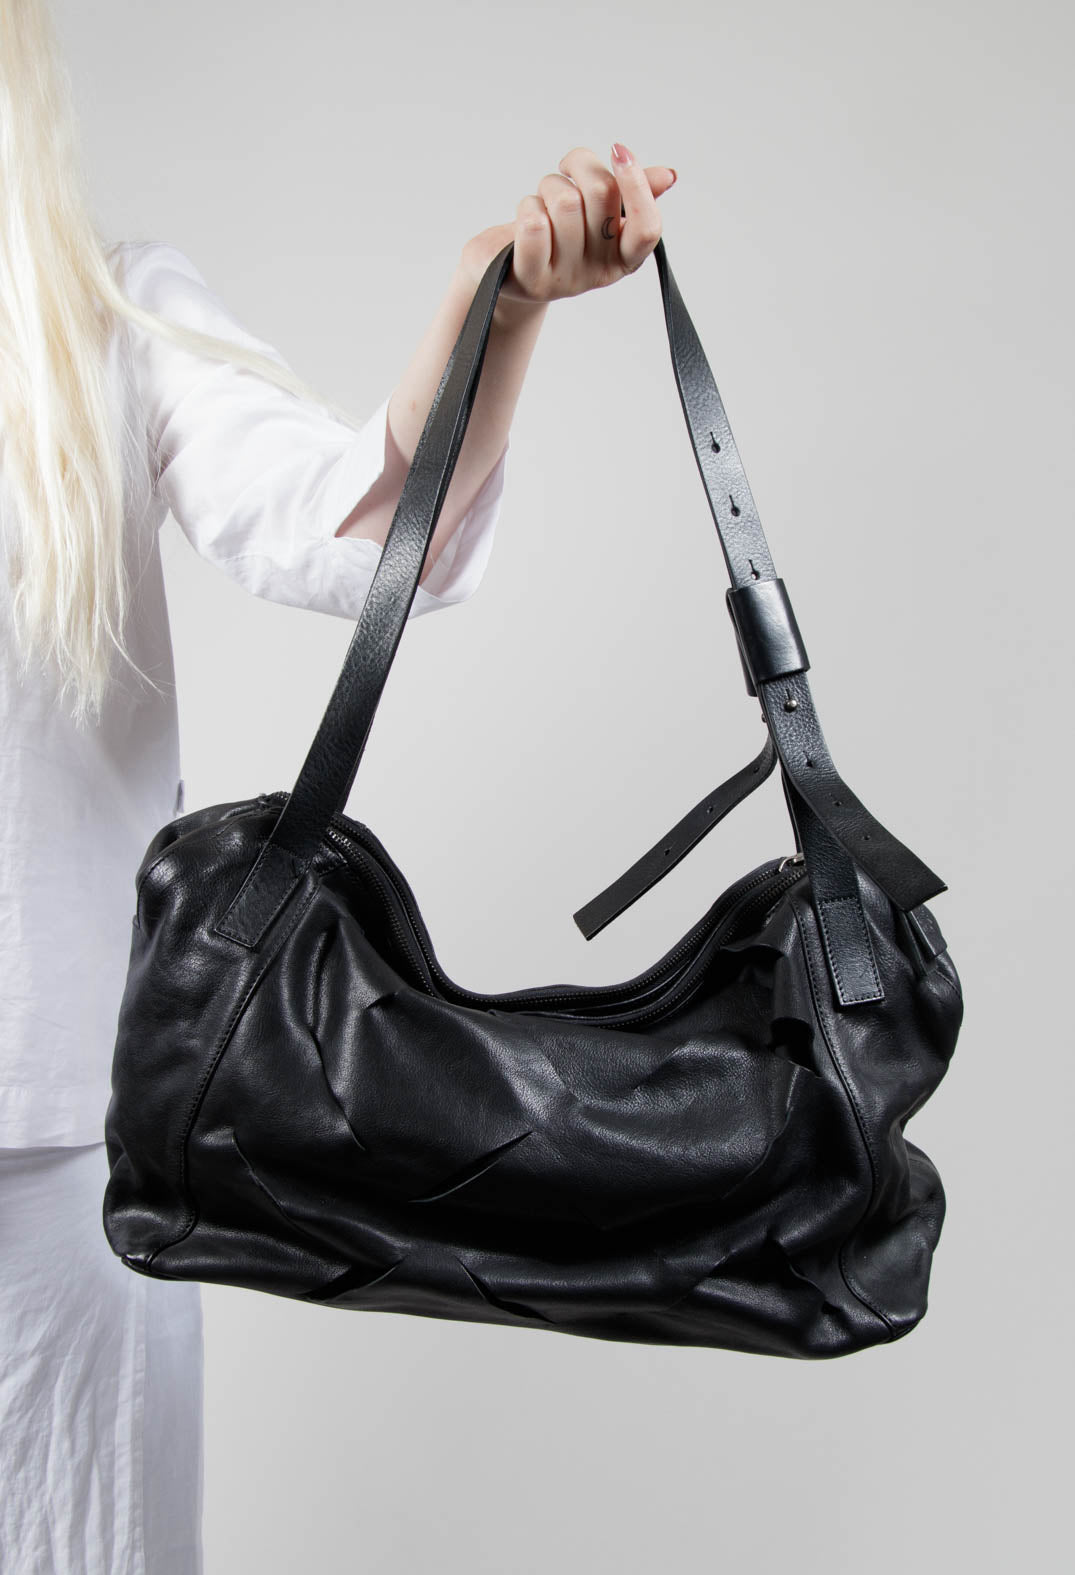 Large Leather Bag with Strap Detail in Borsa Punk Nero